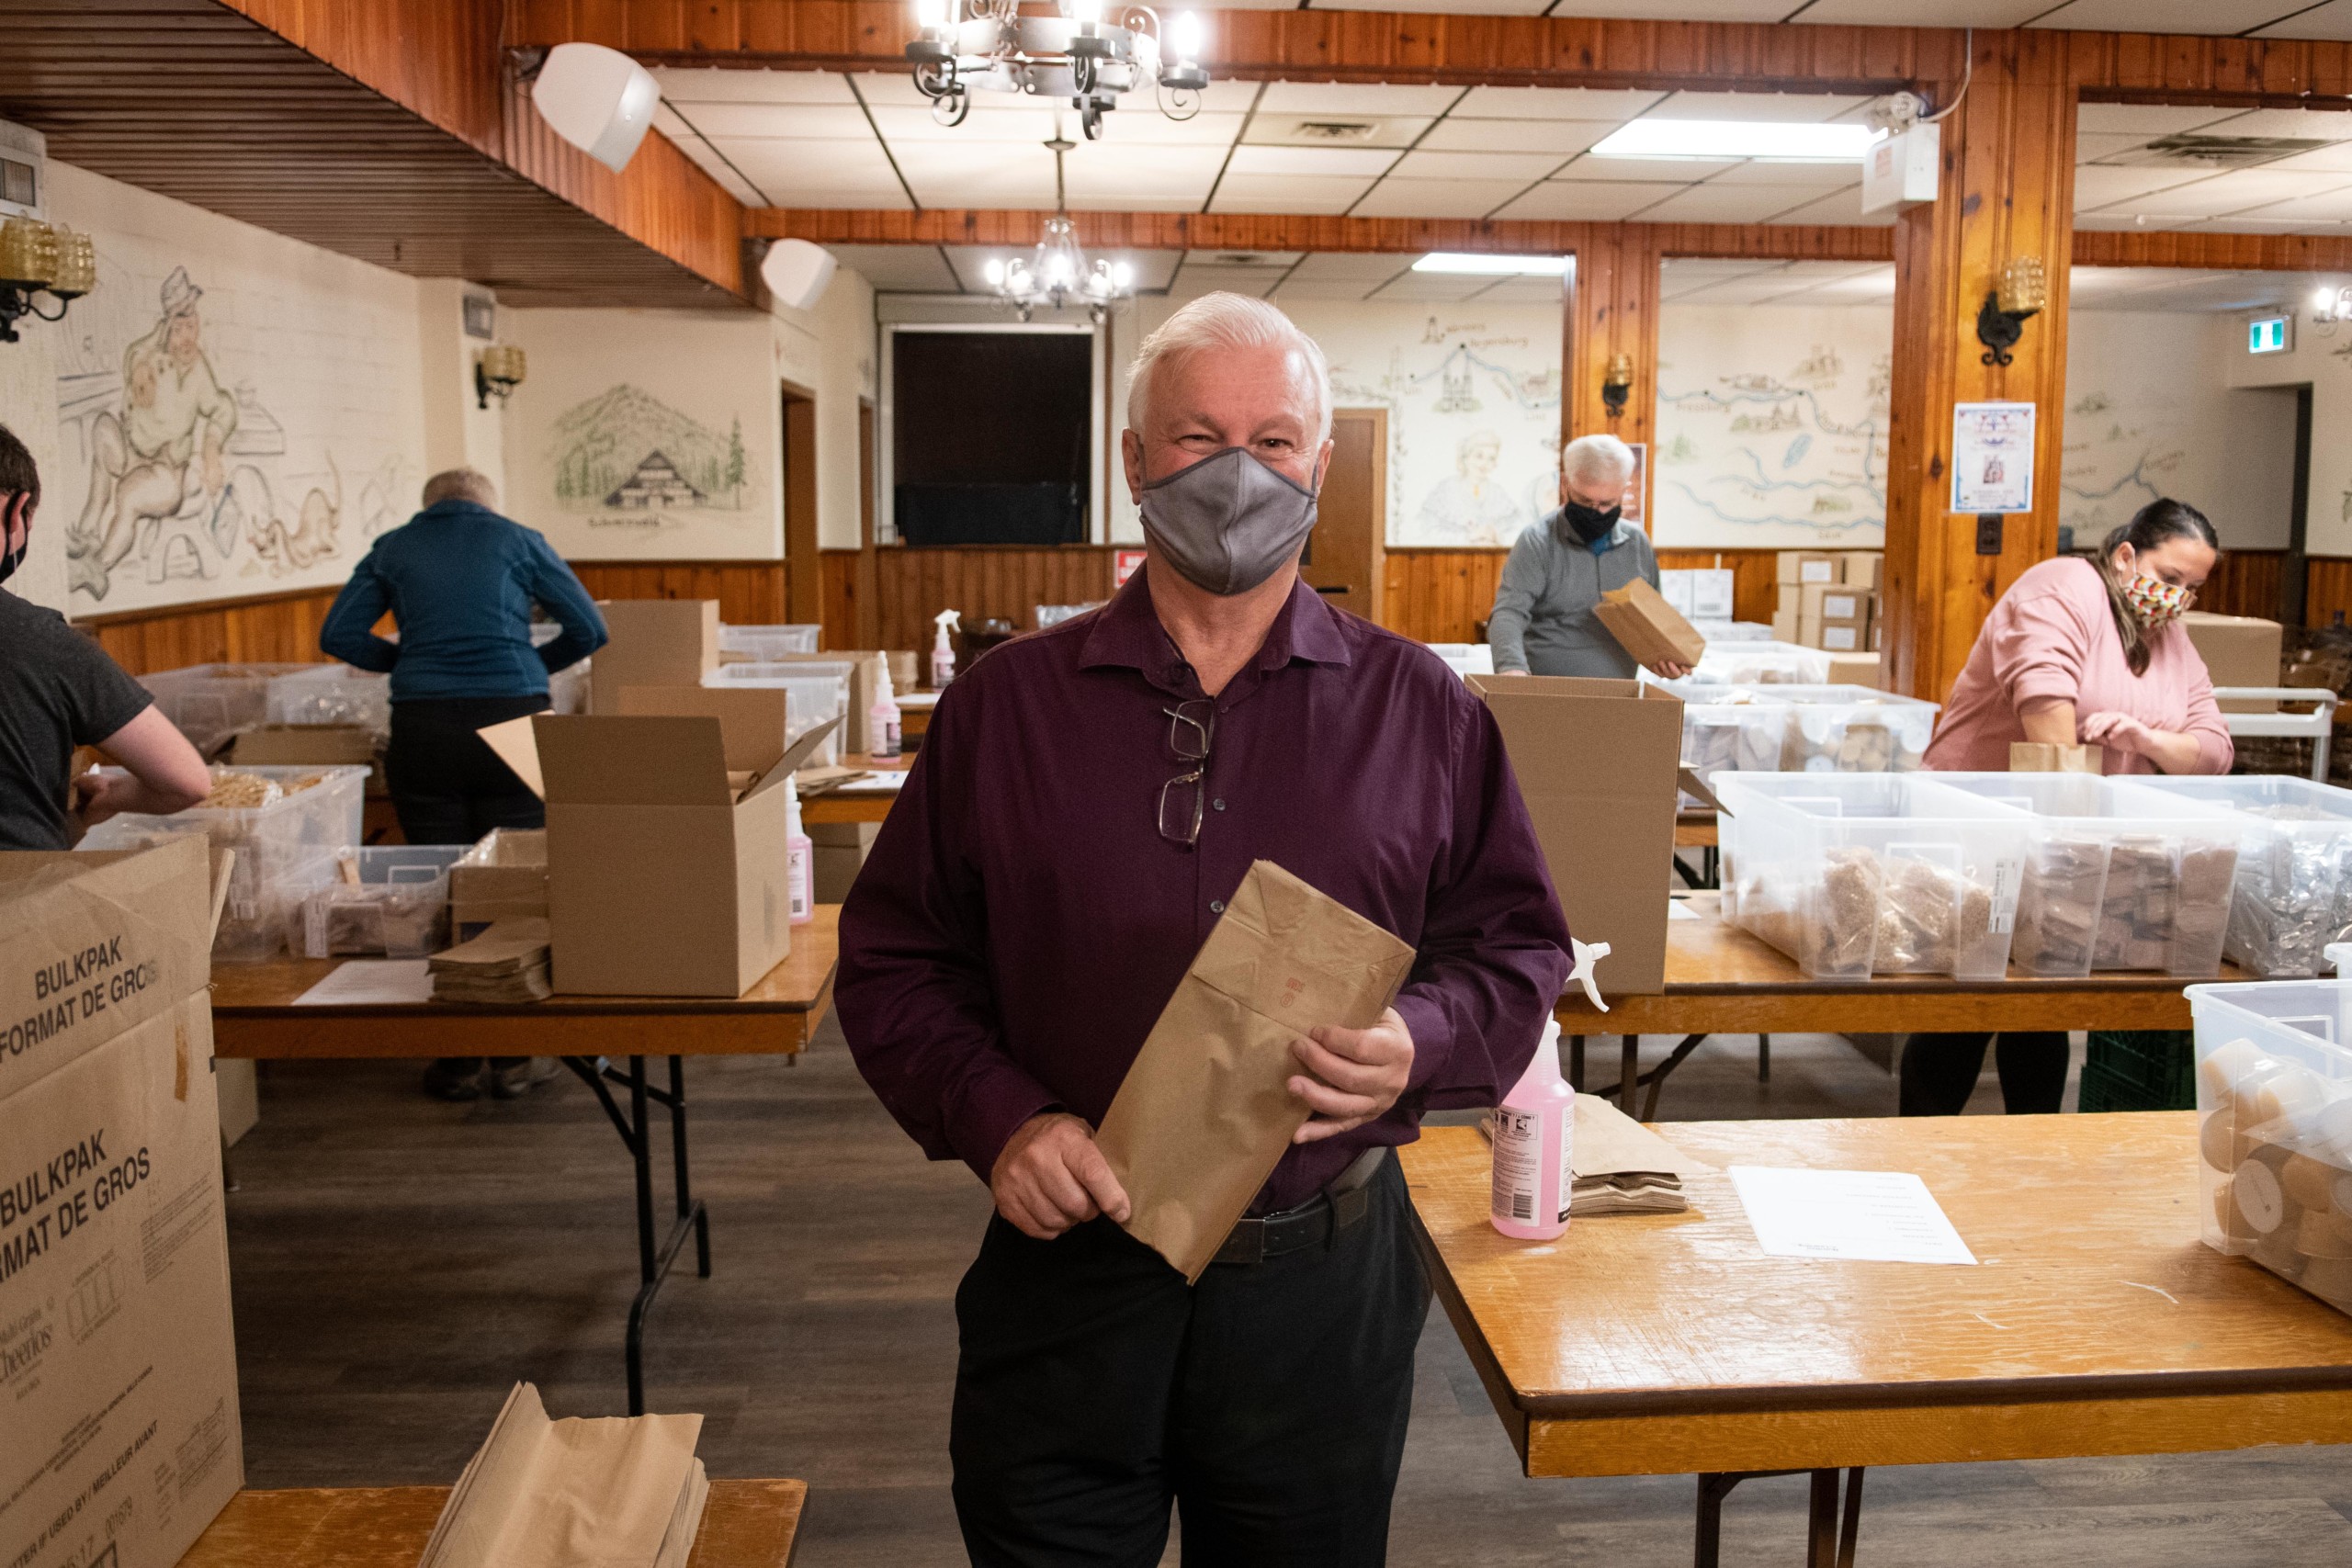 Volunteers pack food for students at the Schwaben Club in August 2020